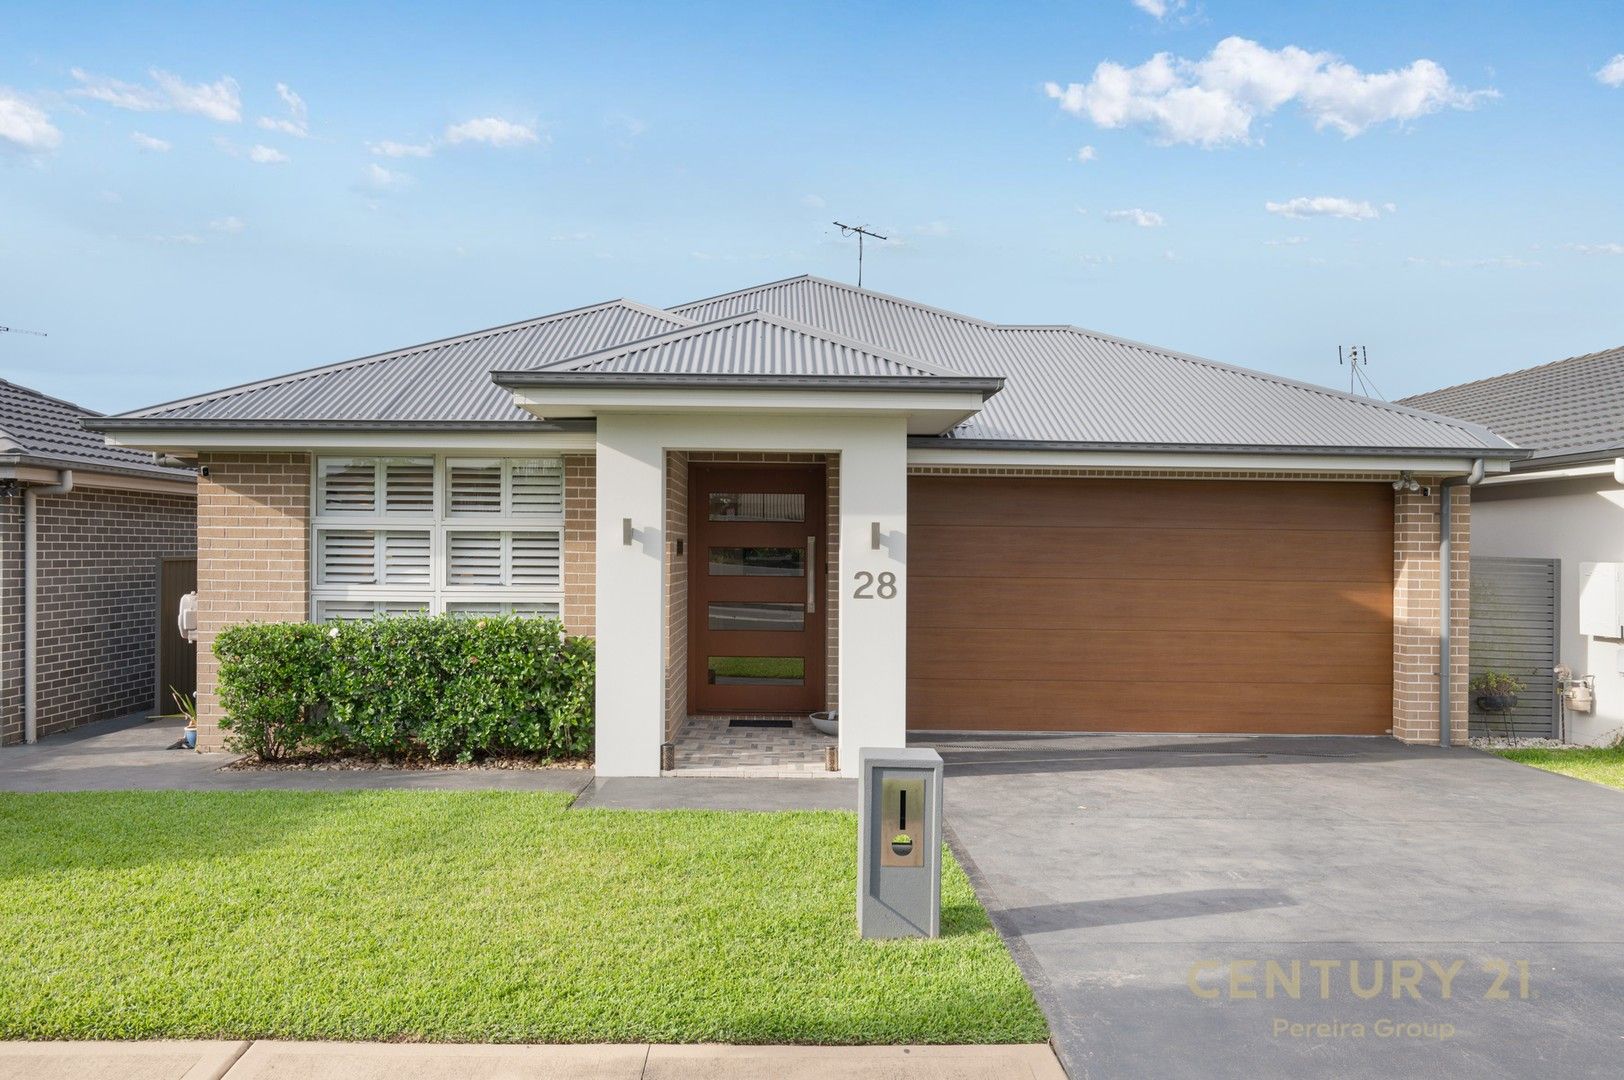 3 bedrooms House in 28 Hollows Drive ORAN PARK NSW, 2570